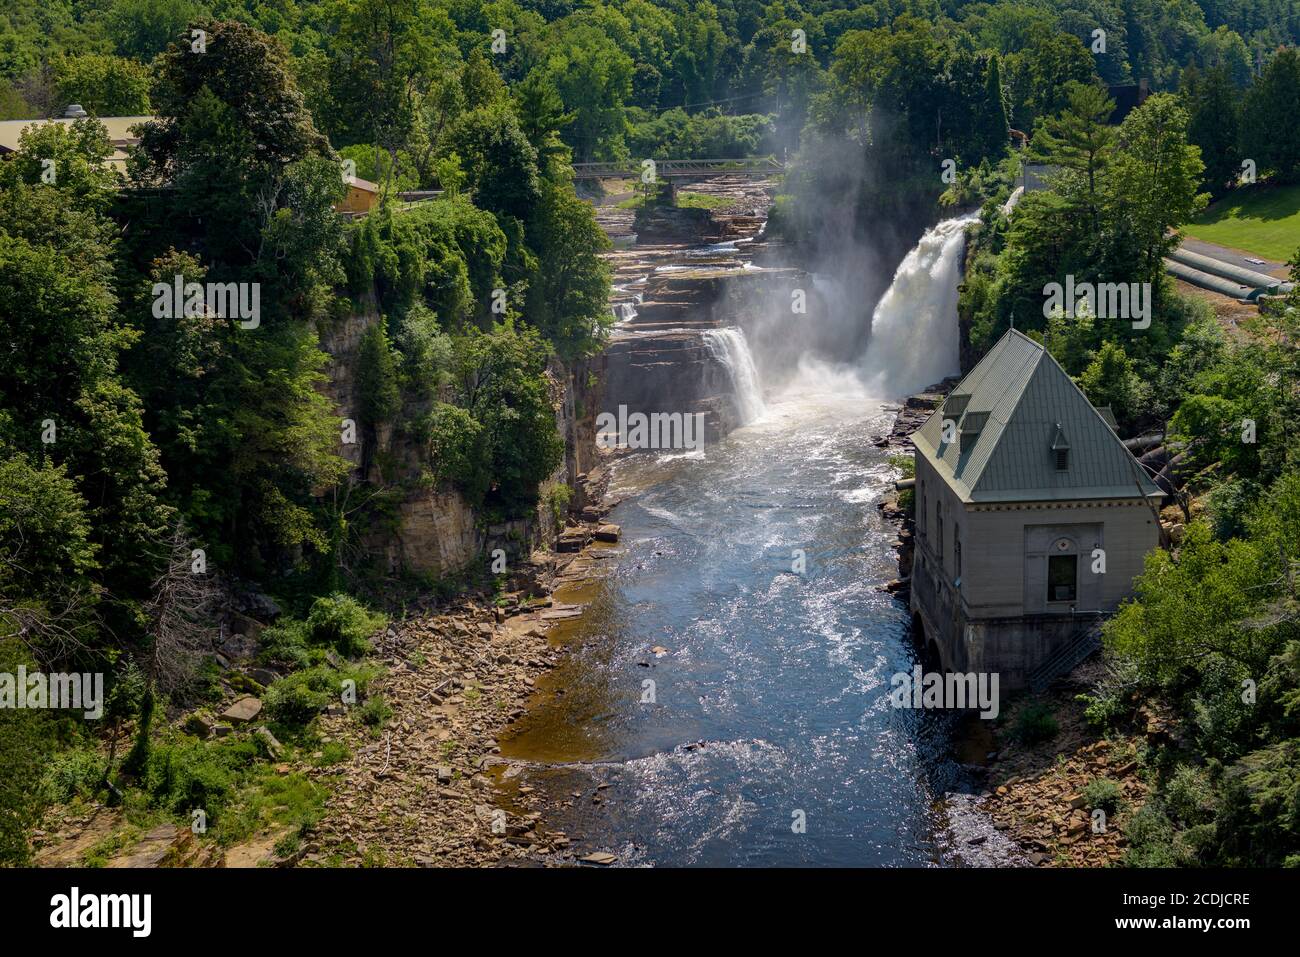 Summer veiw of Rainbow Falls and hydro electric building, Ausable River, Ausable Chasm, New York Stock Photo